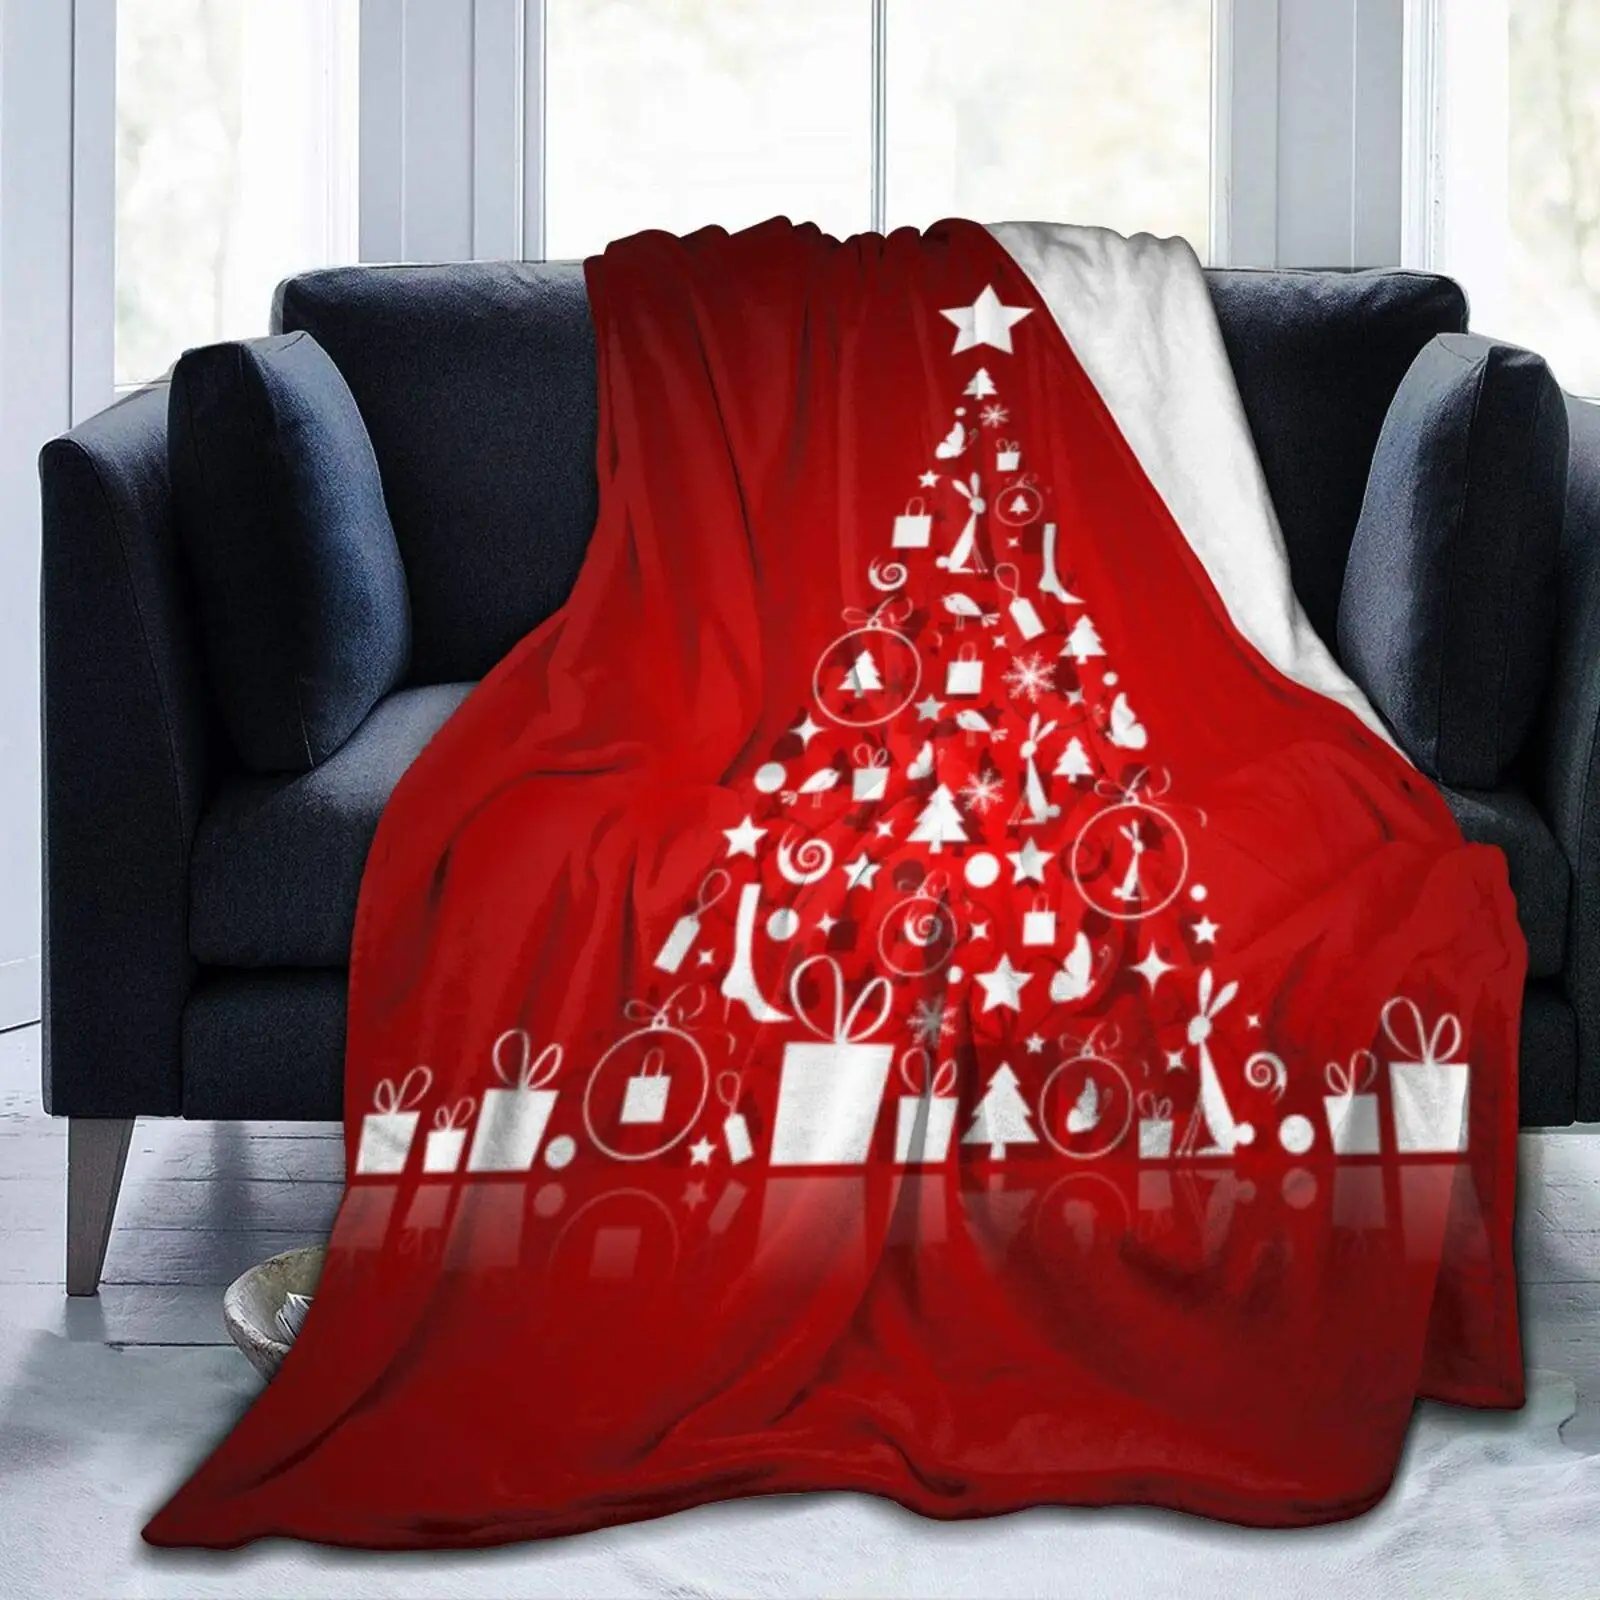 

Christmas Fleece Throw Blanket Christmas Tree Beautiful for Your Lightweight Cozy Soft Plush Blanket for Couch Sofa Bed-60"x50"